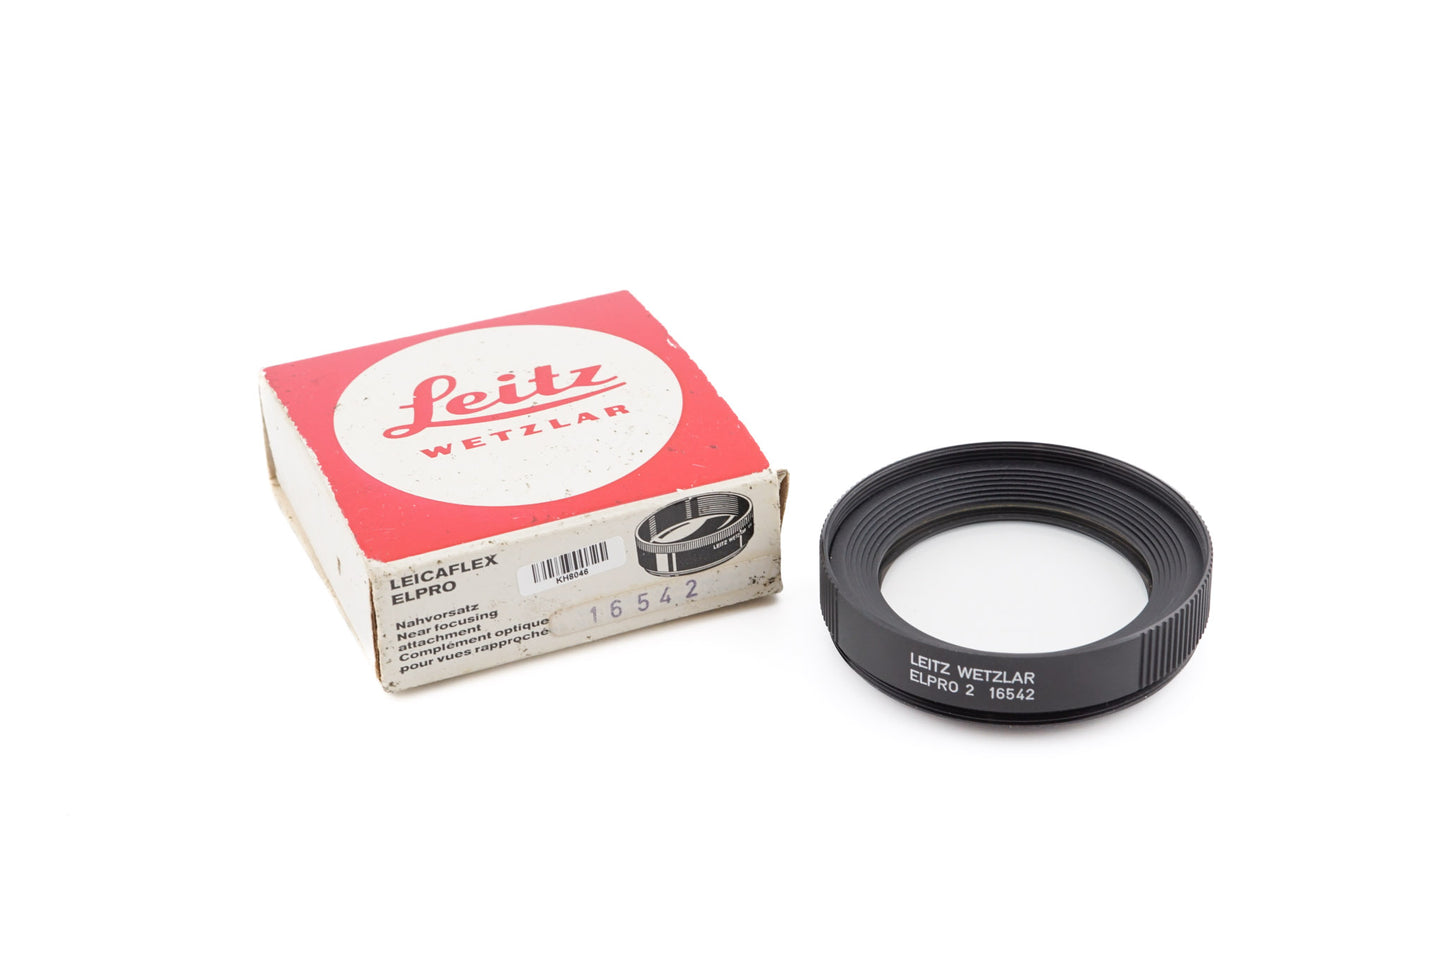 Leica 55mm Close-Up Filter ELPRO 2 (16542)